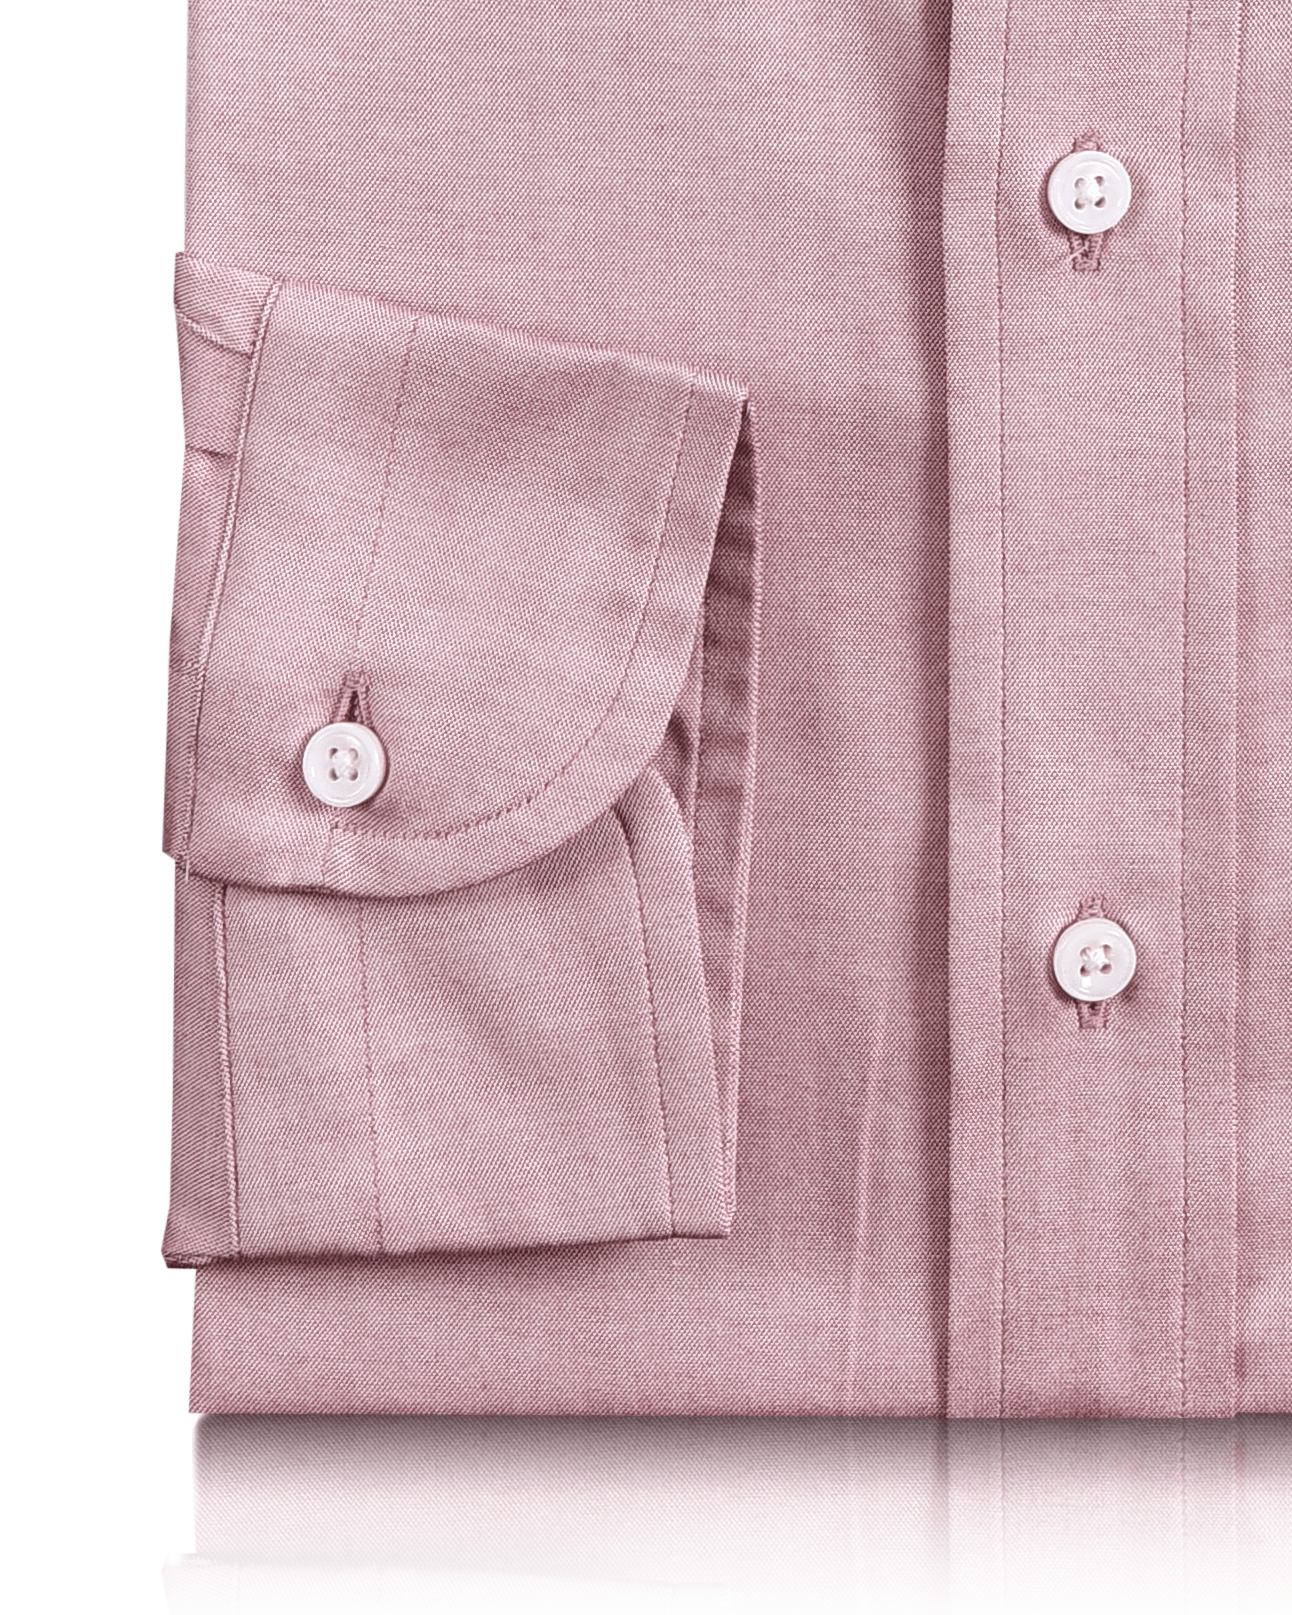 Cuff of the custom oxford shirt for men by Luxire in pale maroon